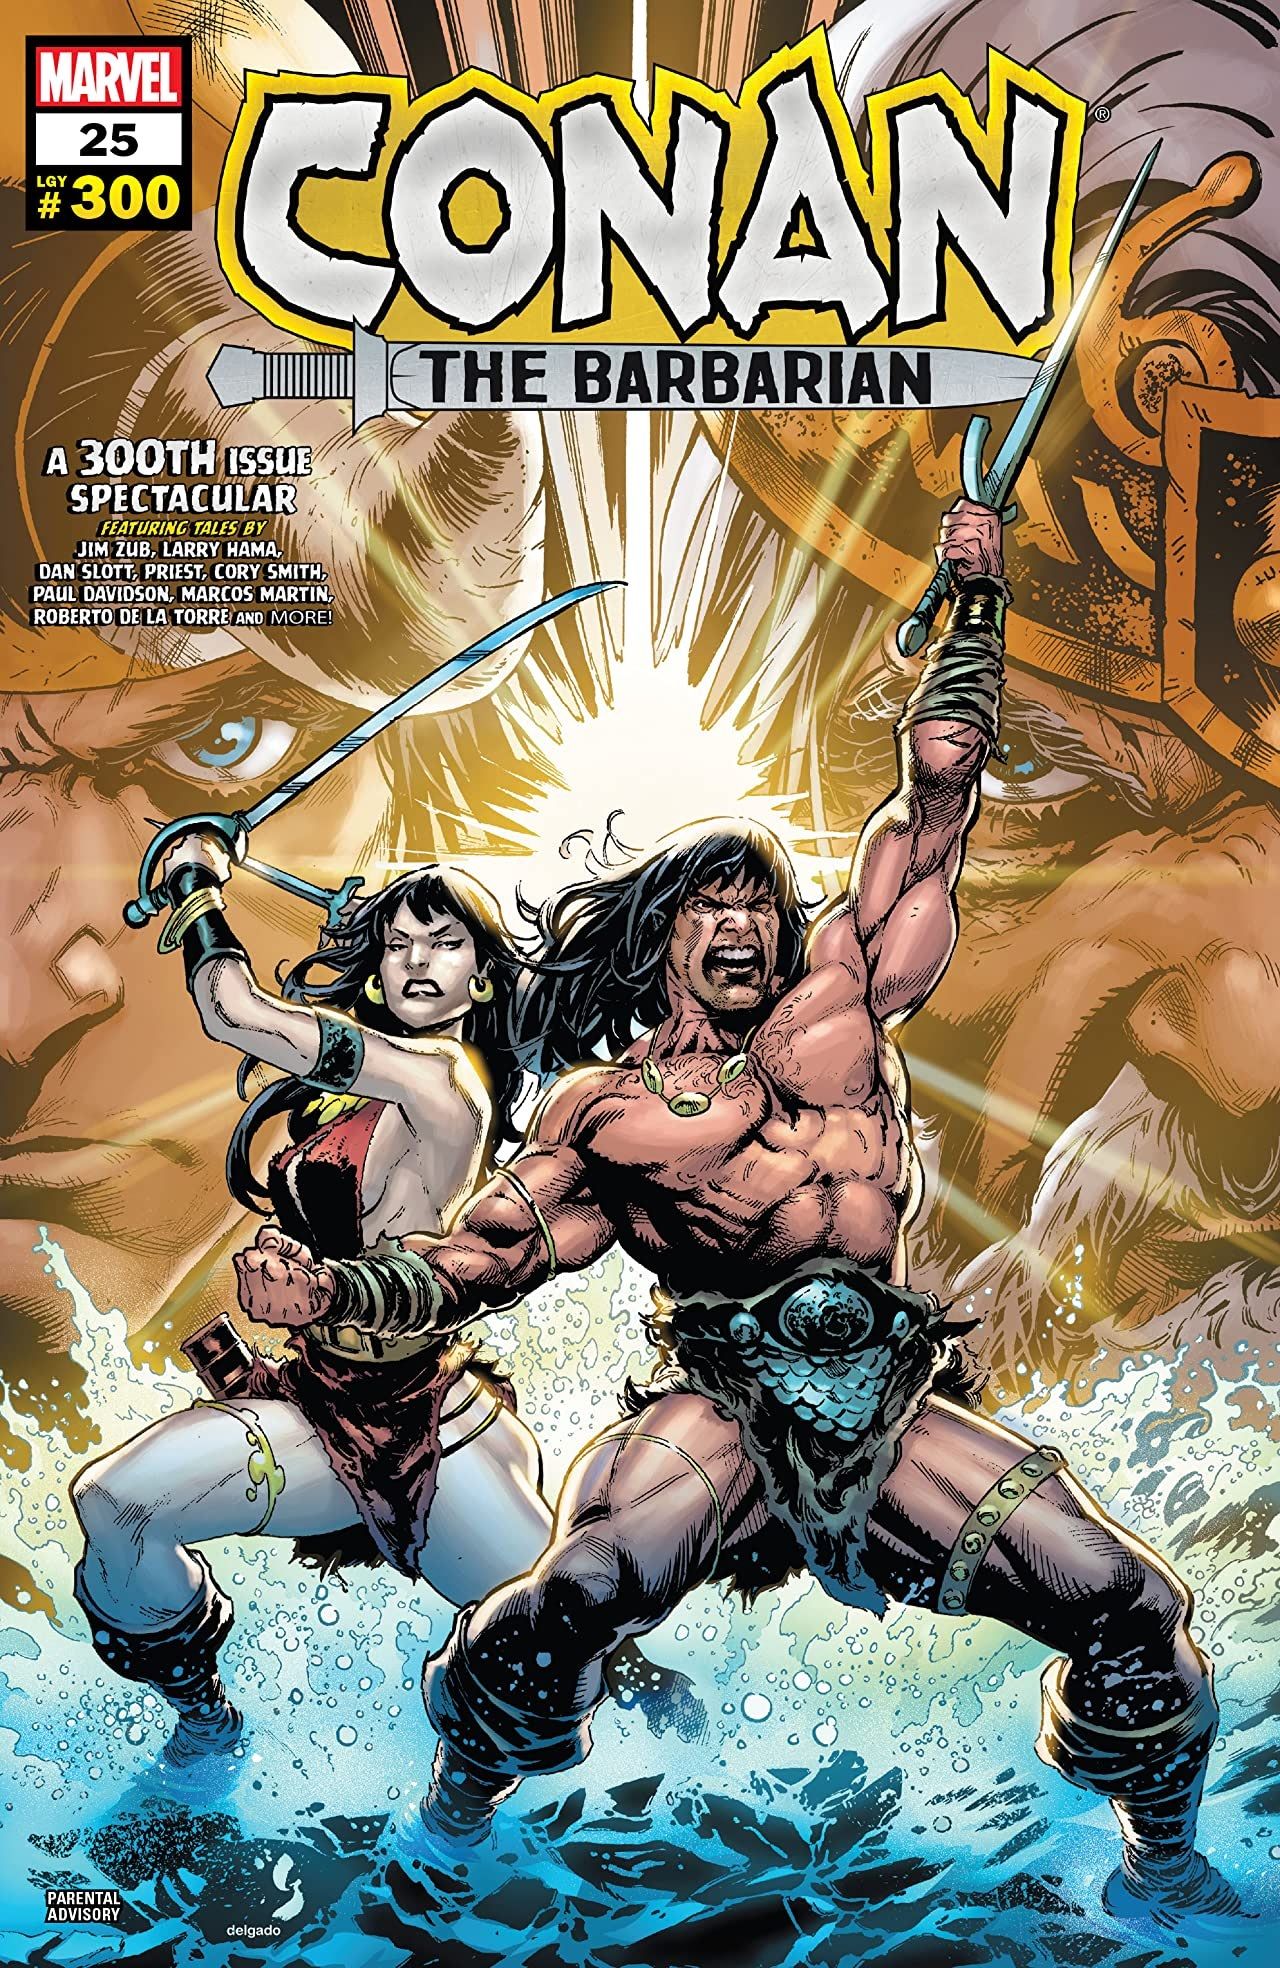 Conan and Belit on the cover of Conan the Barbarian 25 by Geoff Shaw